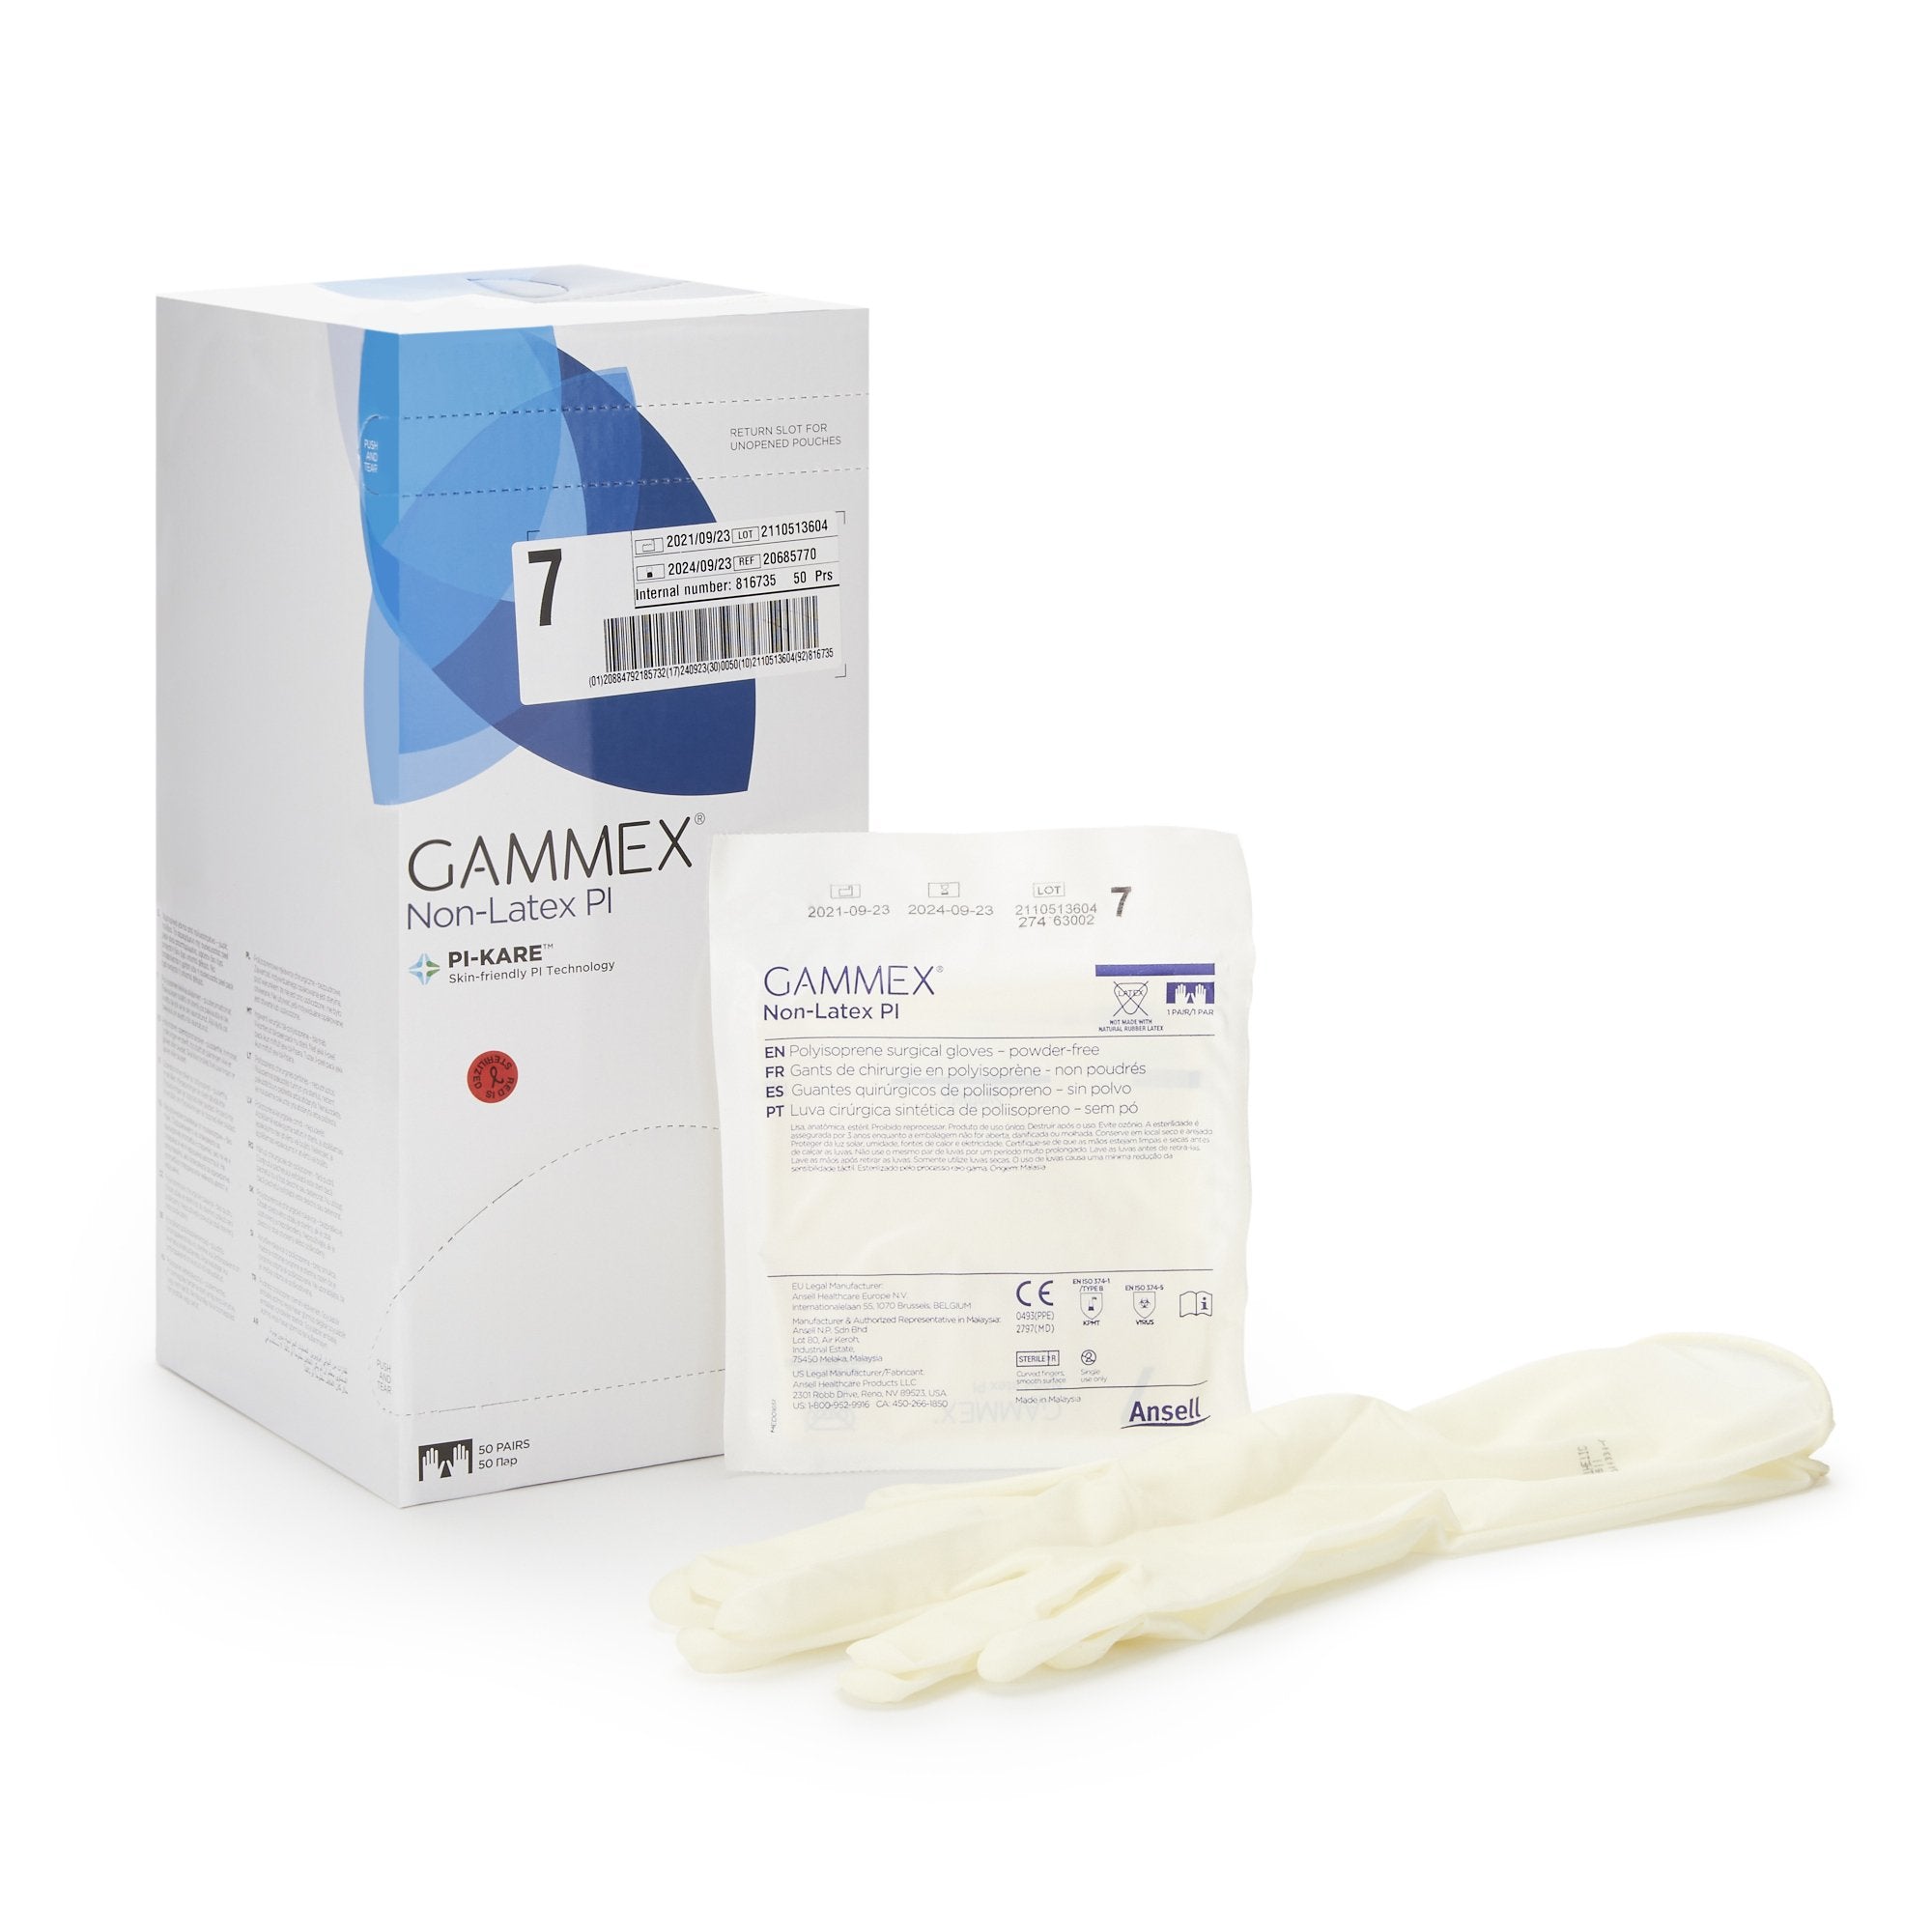 Ansell #20685770 Surgical Glove GAMMEX® Non-Latex PI Size 7 Sterile 50/bx